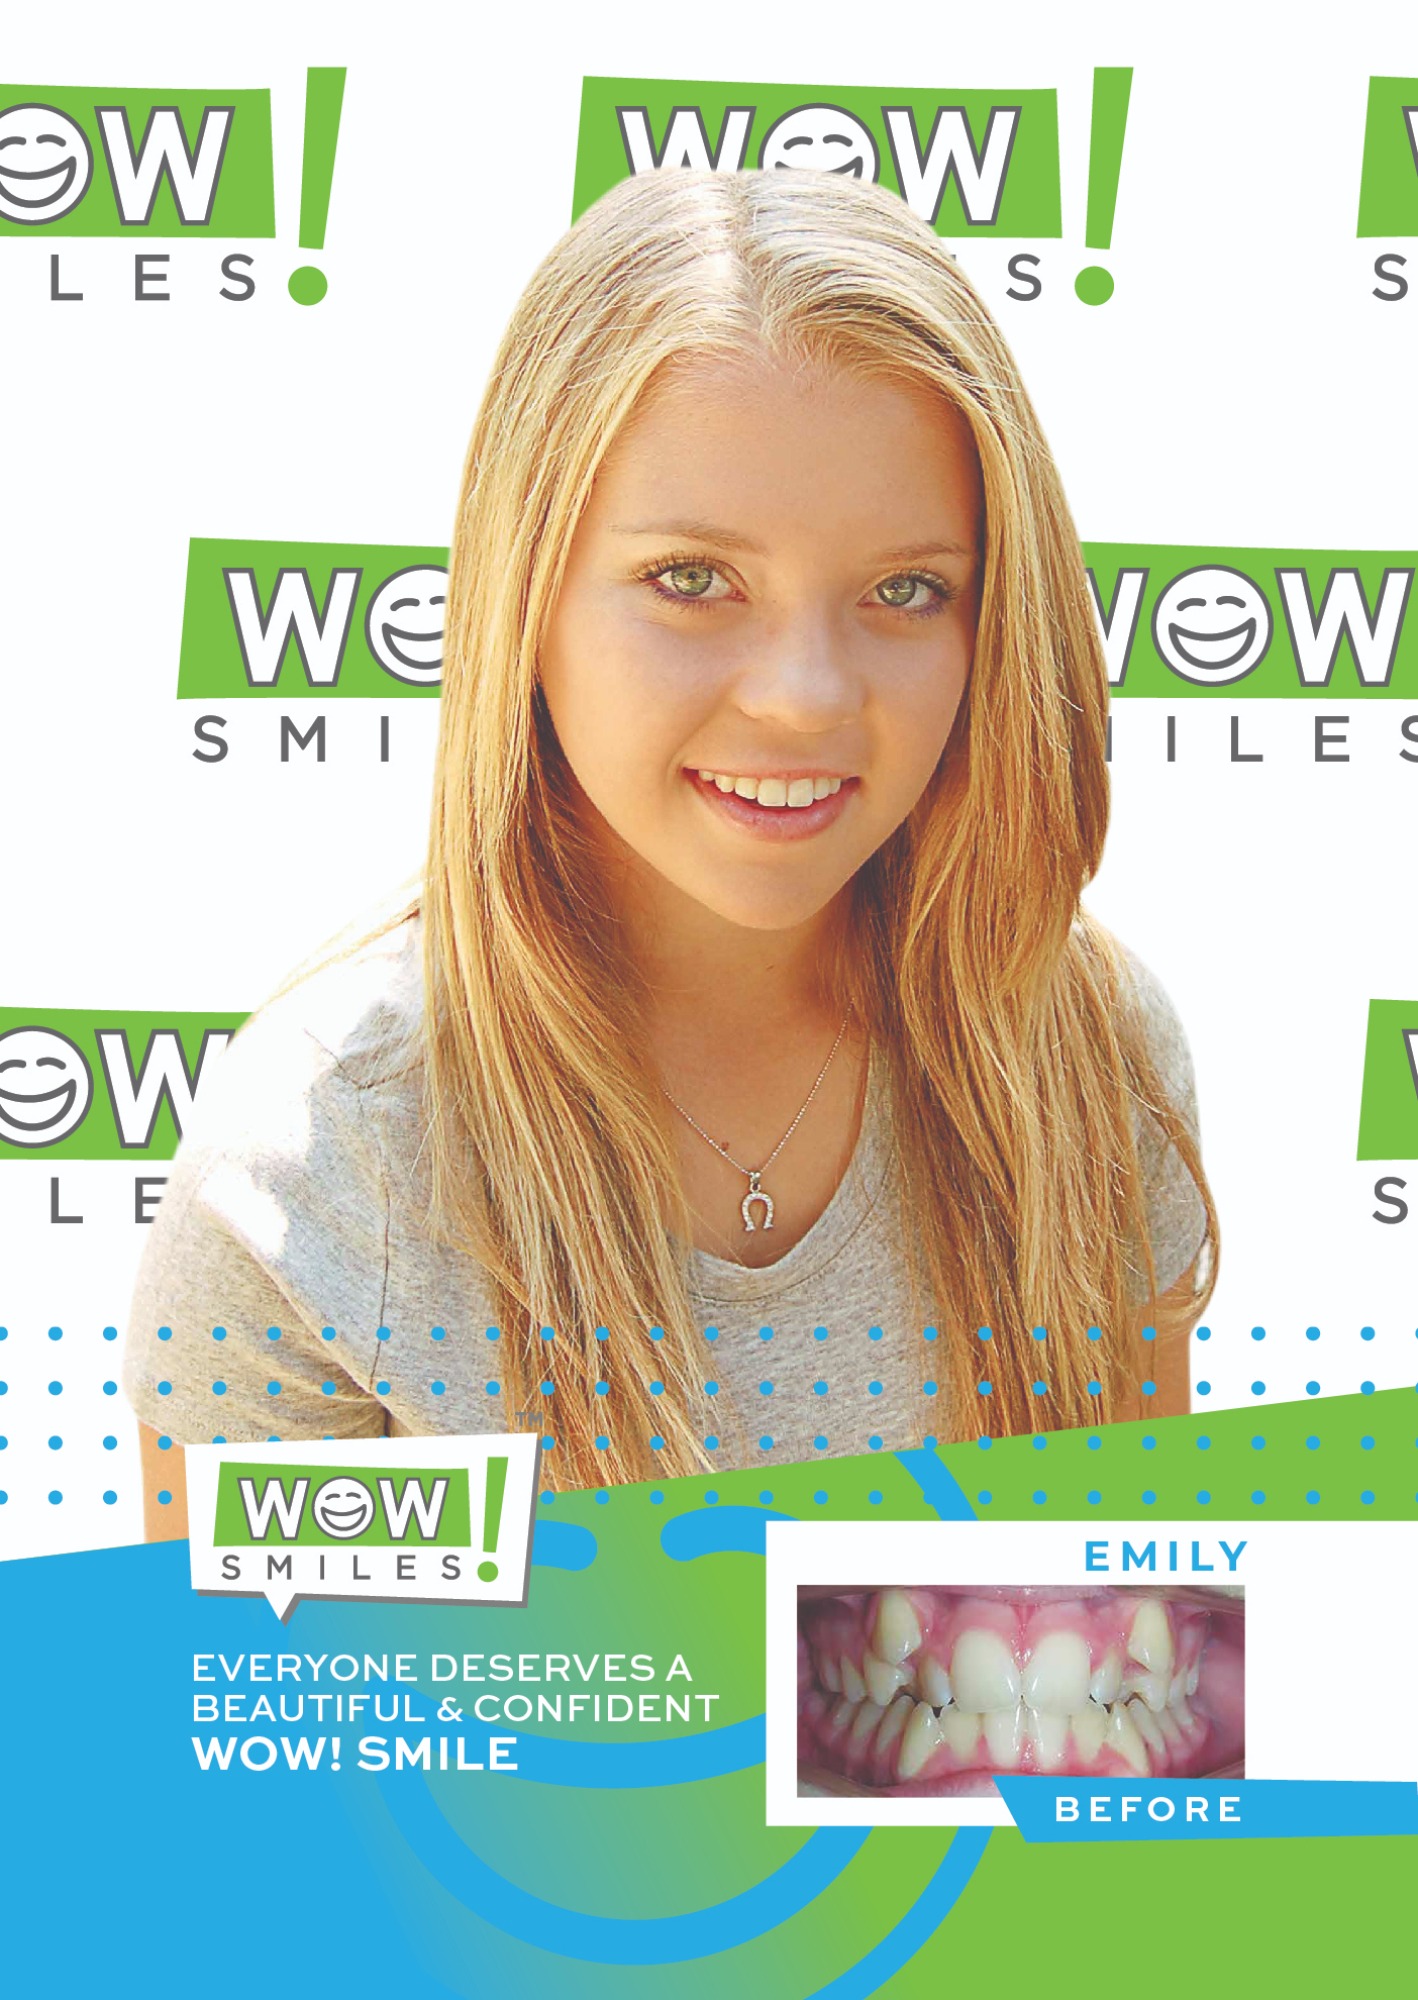 2022-05-17_Wow Smiles_Before and After Posters_Emily_CC-01